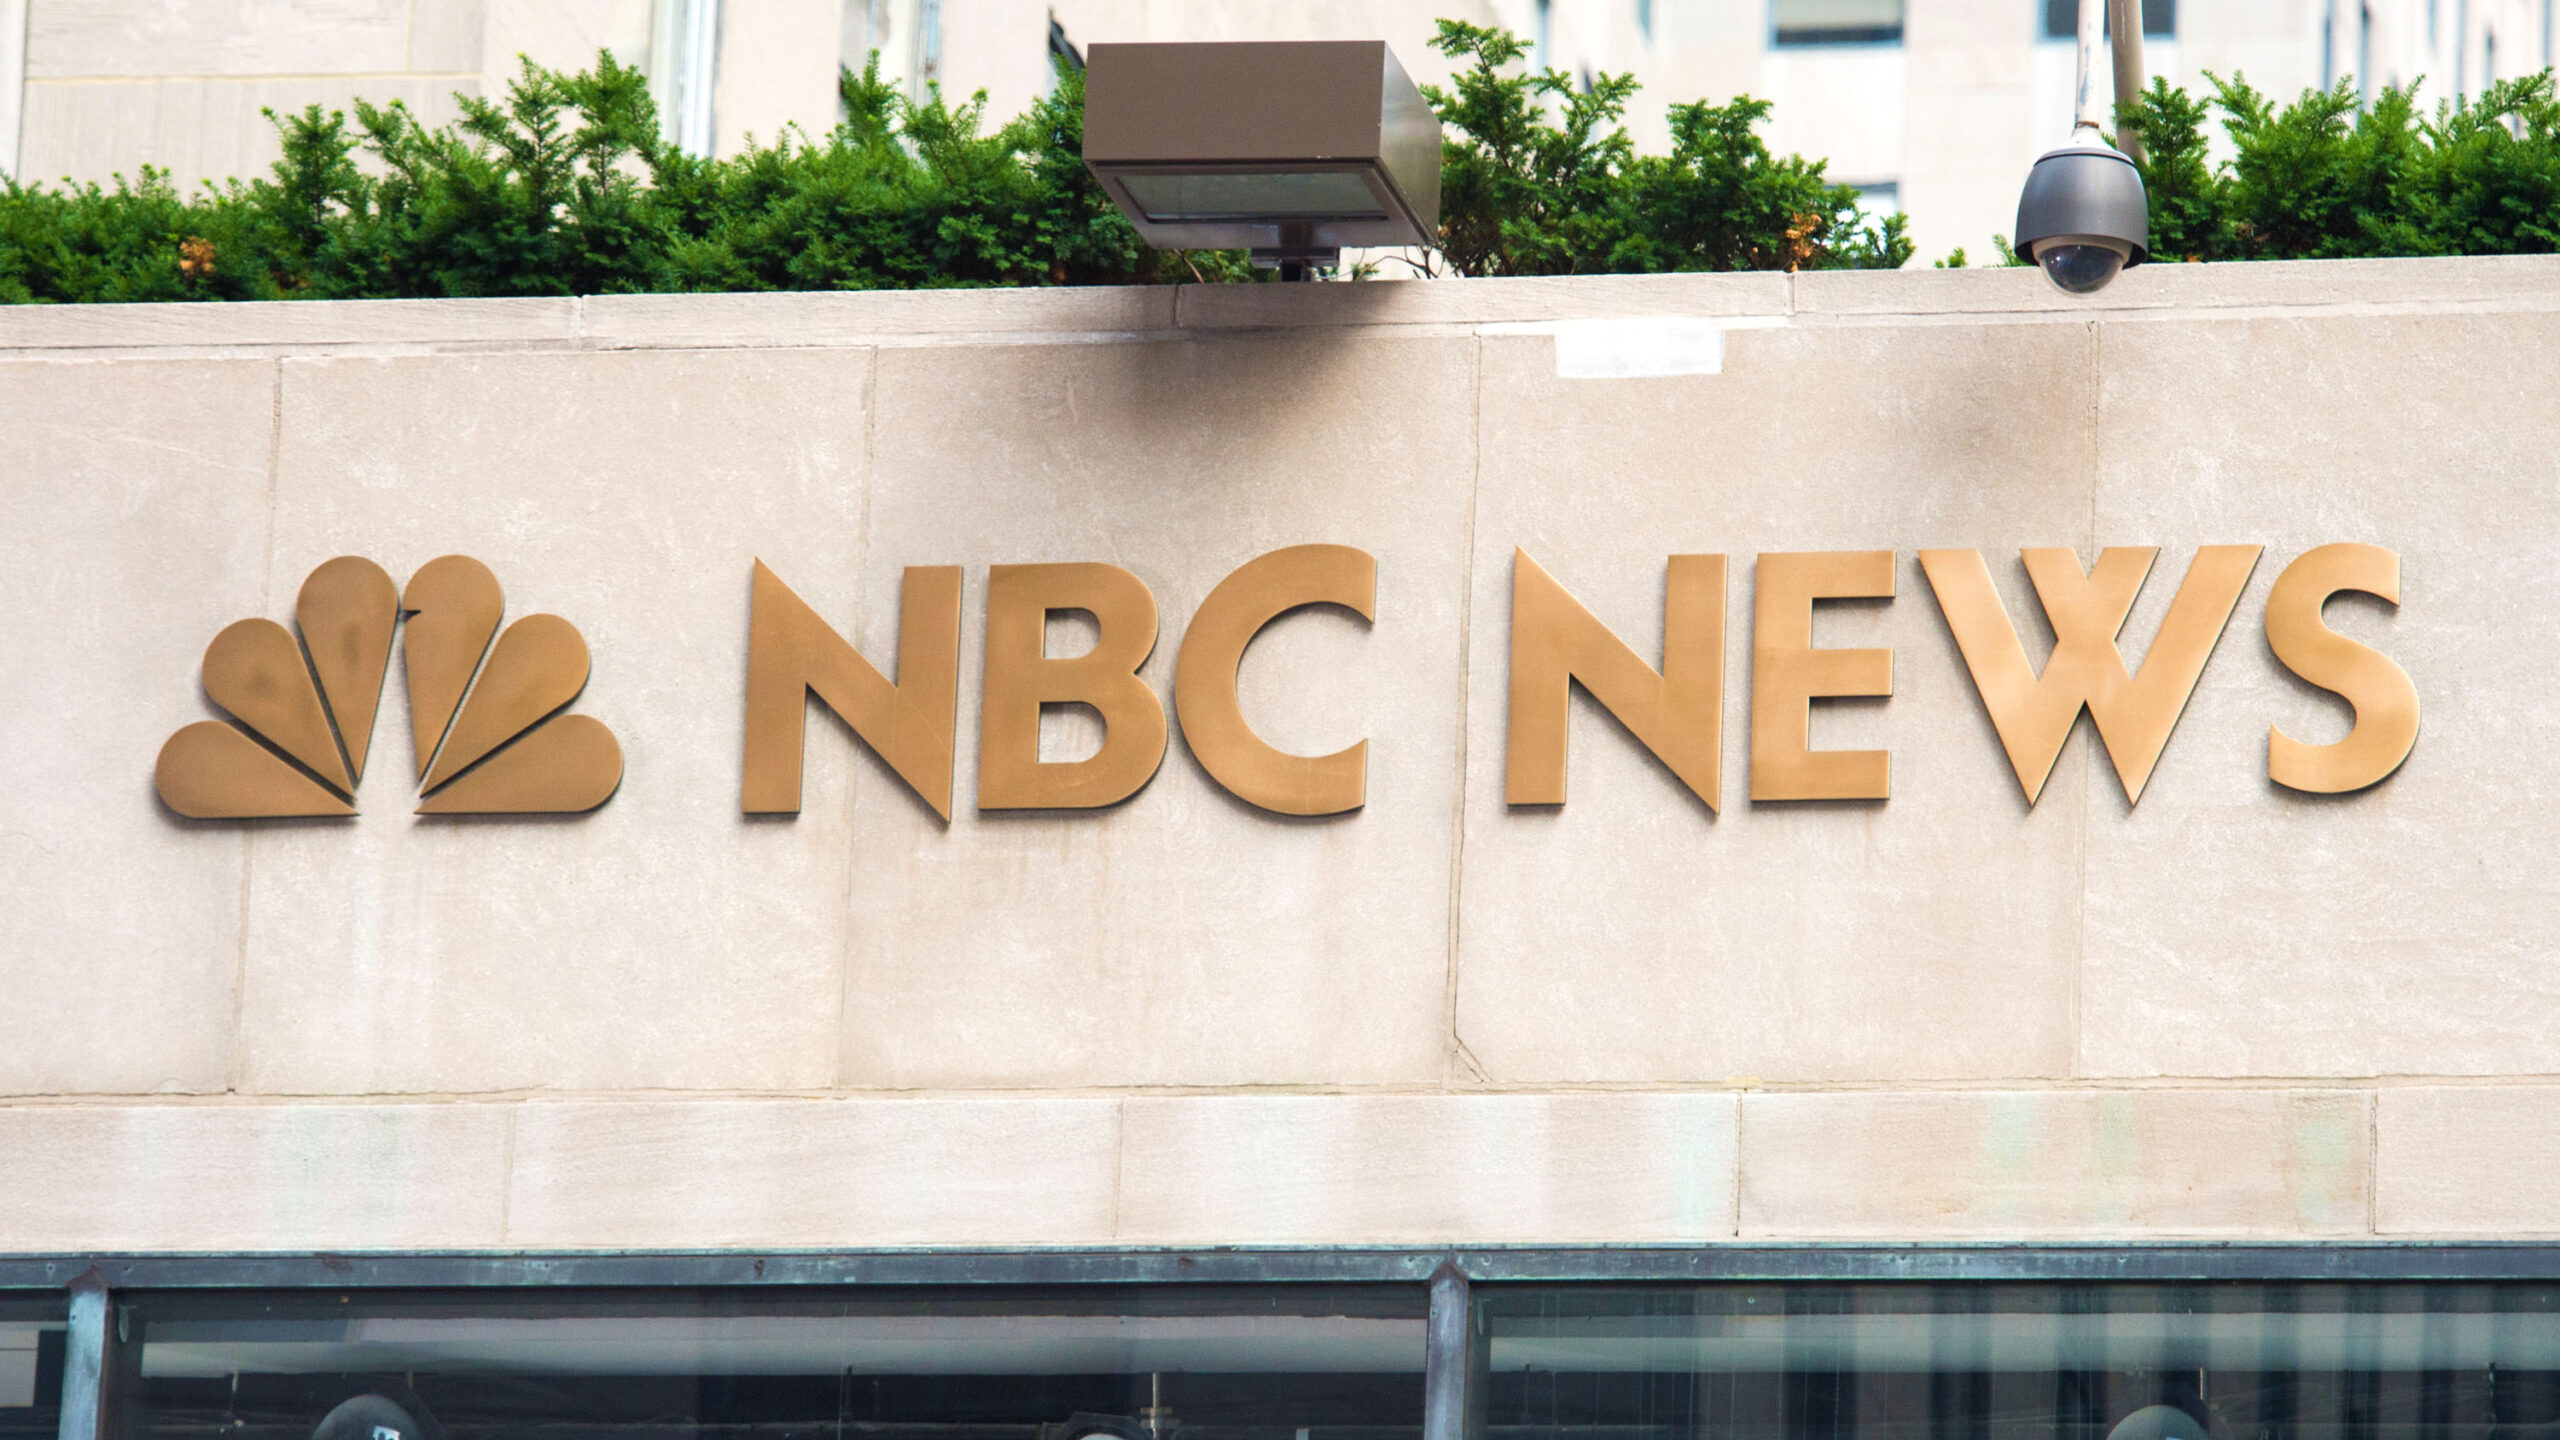 NBC News faces criticism for suggesting that while one can alter their gender and sex, race remains unchangeable.